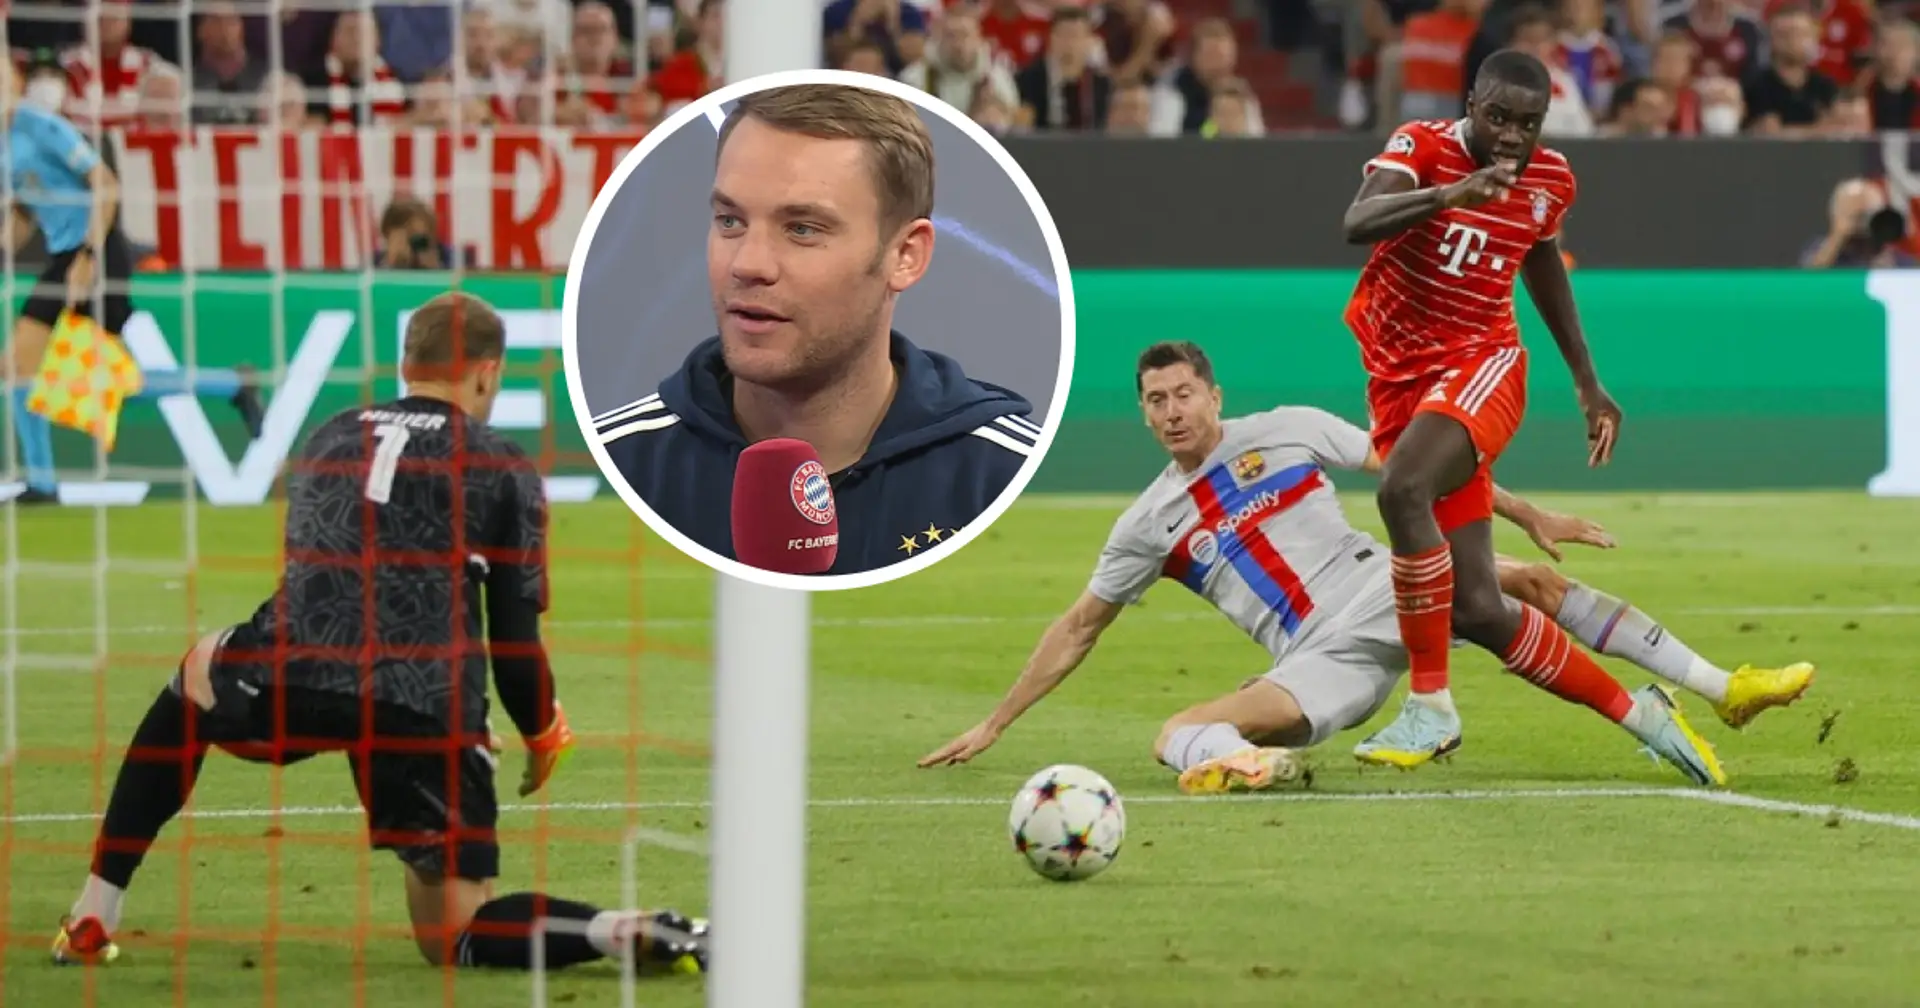 Neuer names 2 game episodes that made things easier for Bayern v Barca